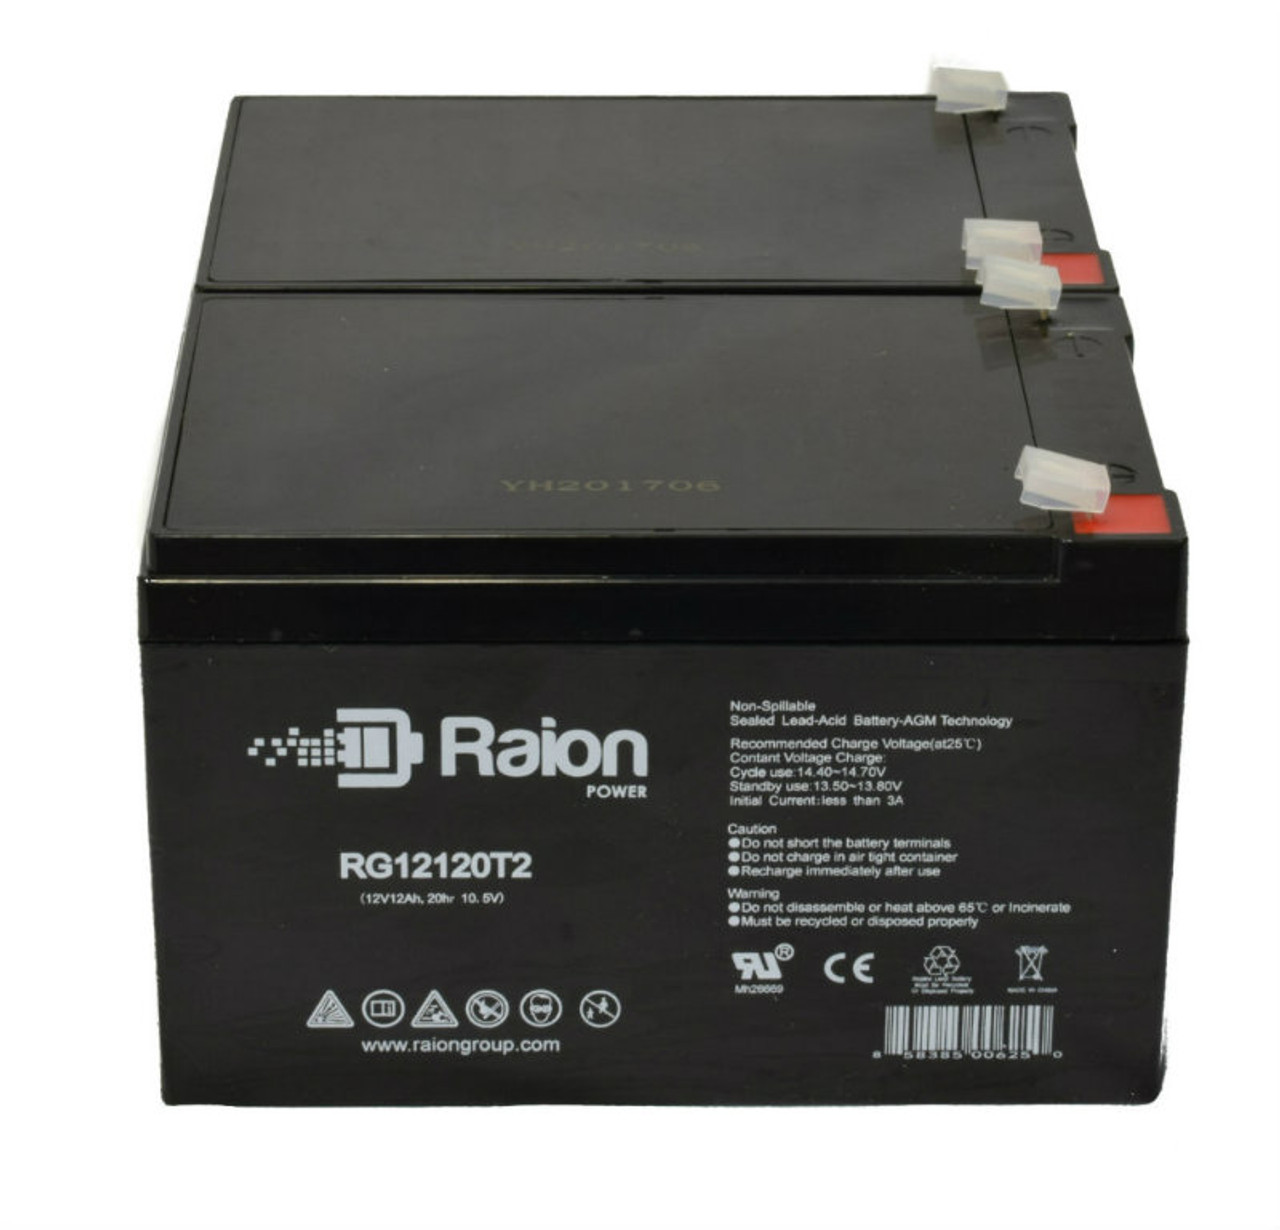 Raion Power 12V 12Ah Replacement Alarm Security System Battery for Altronix AL400ULXPD16CB - 2 Pack